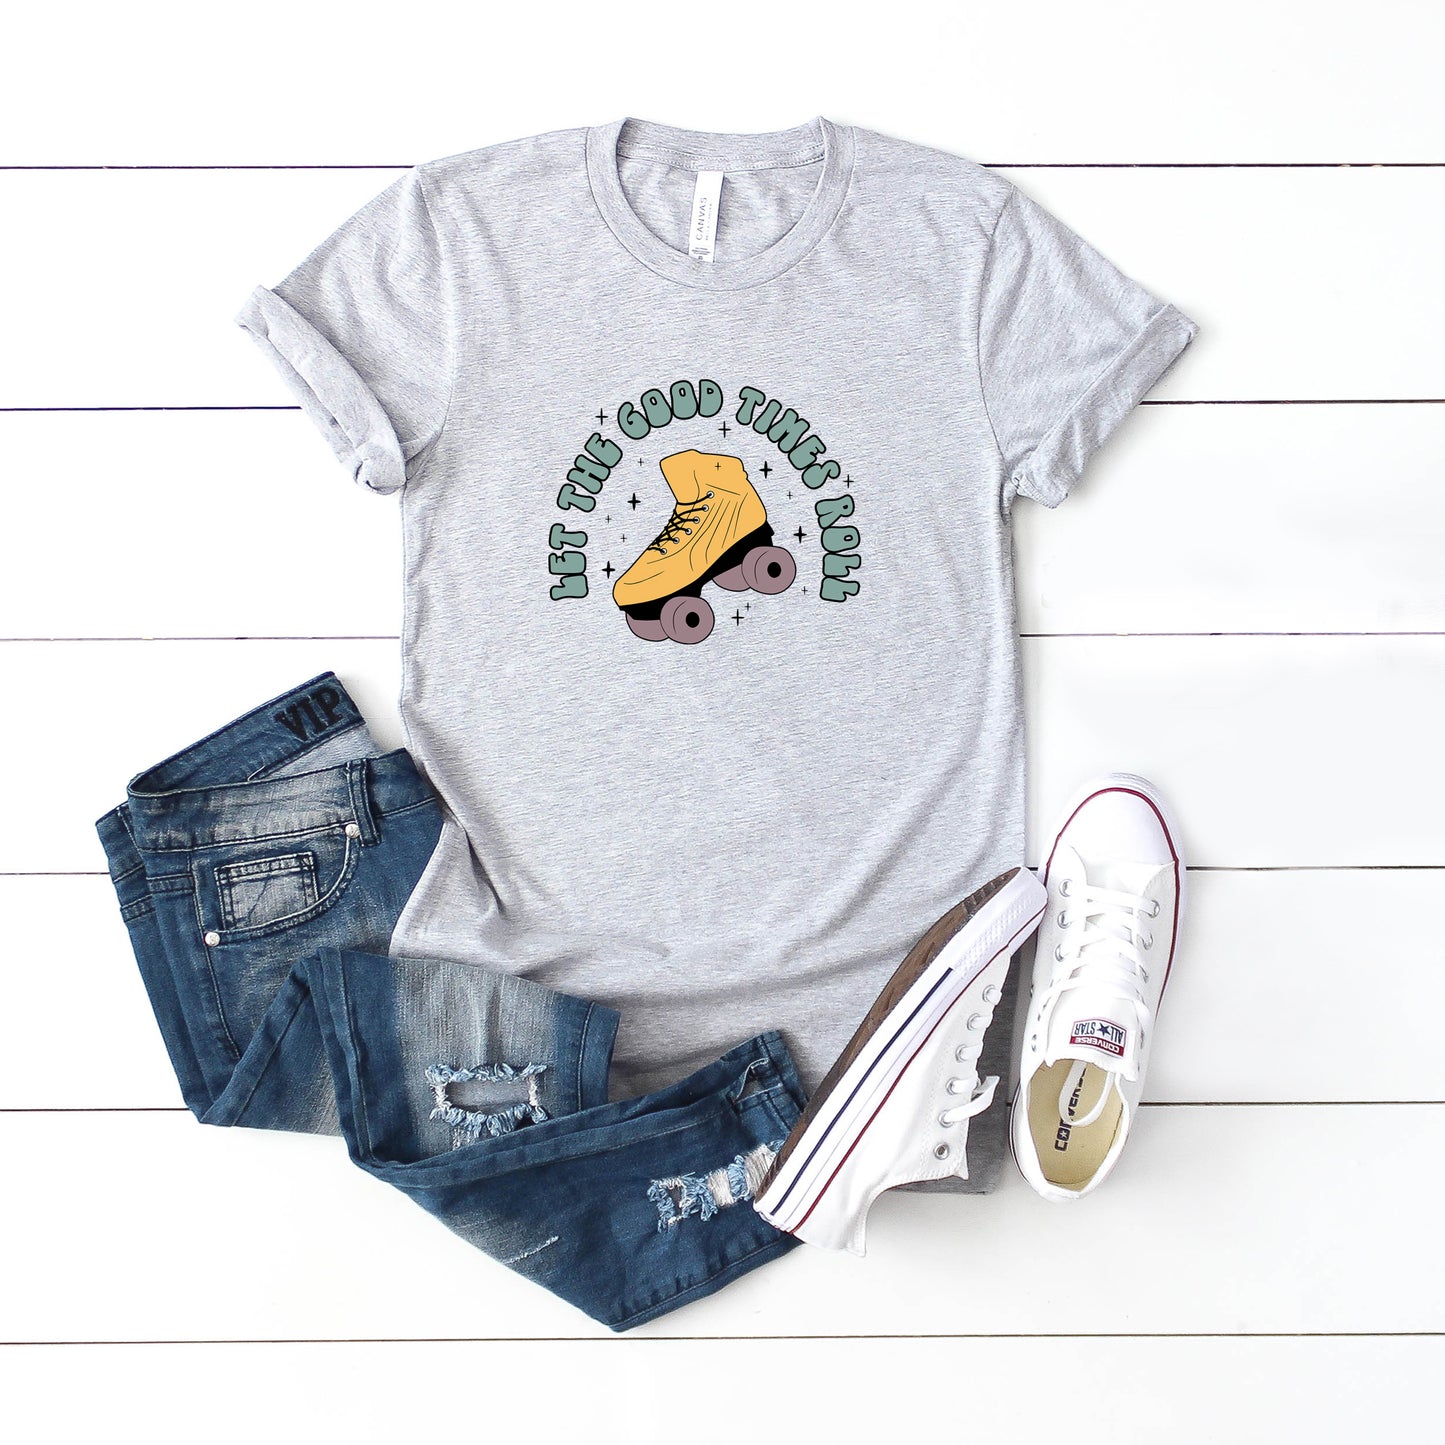 Let The Good Times Roller Skate | Youth Short Sleeve Crew Neck